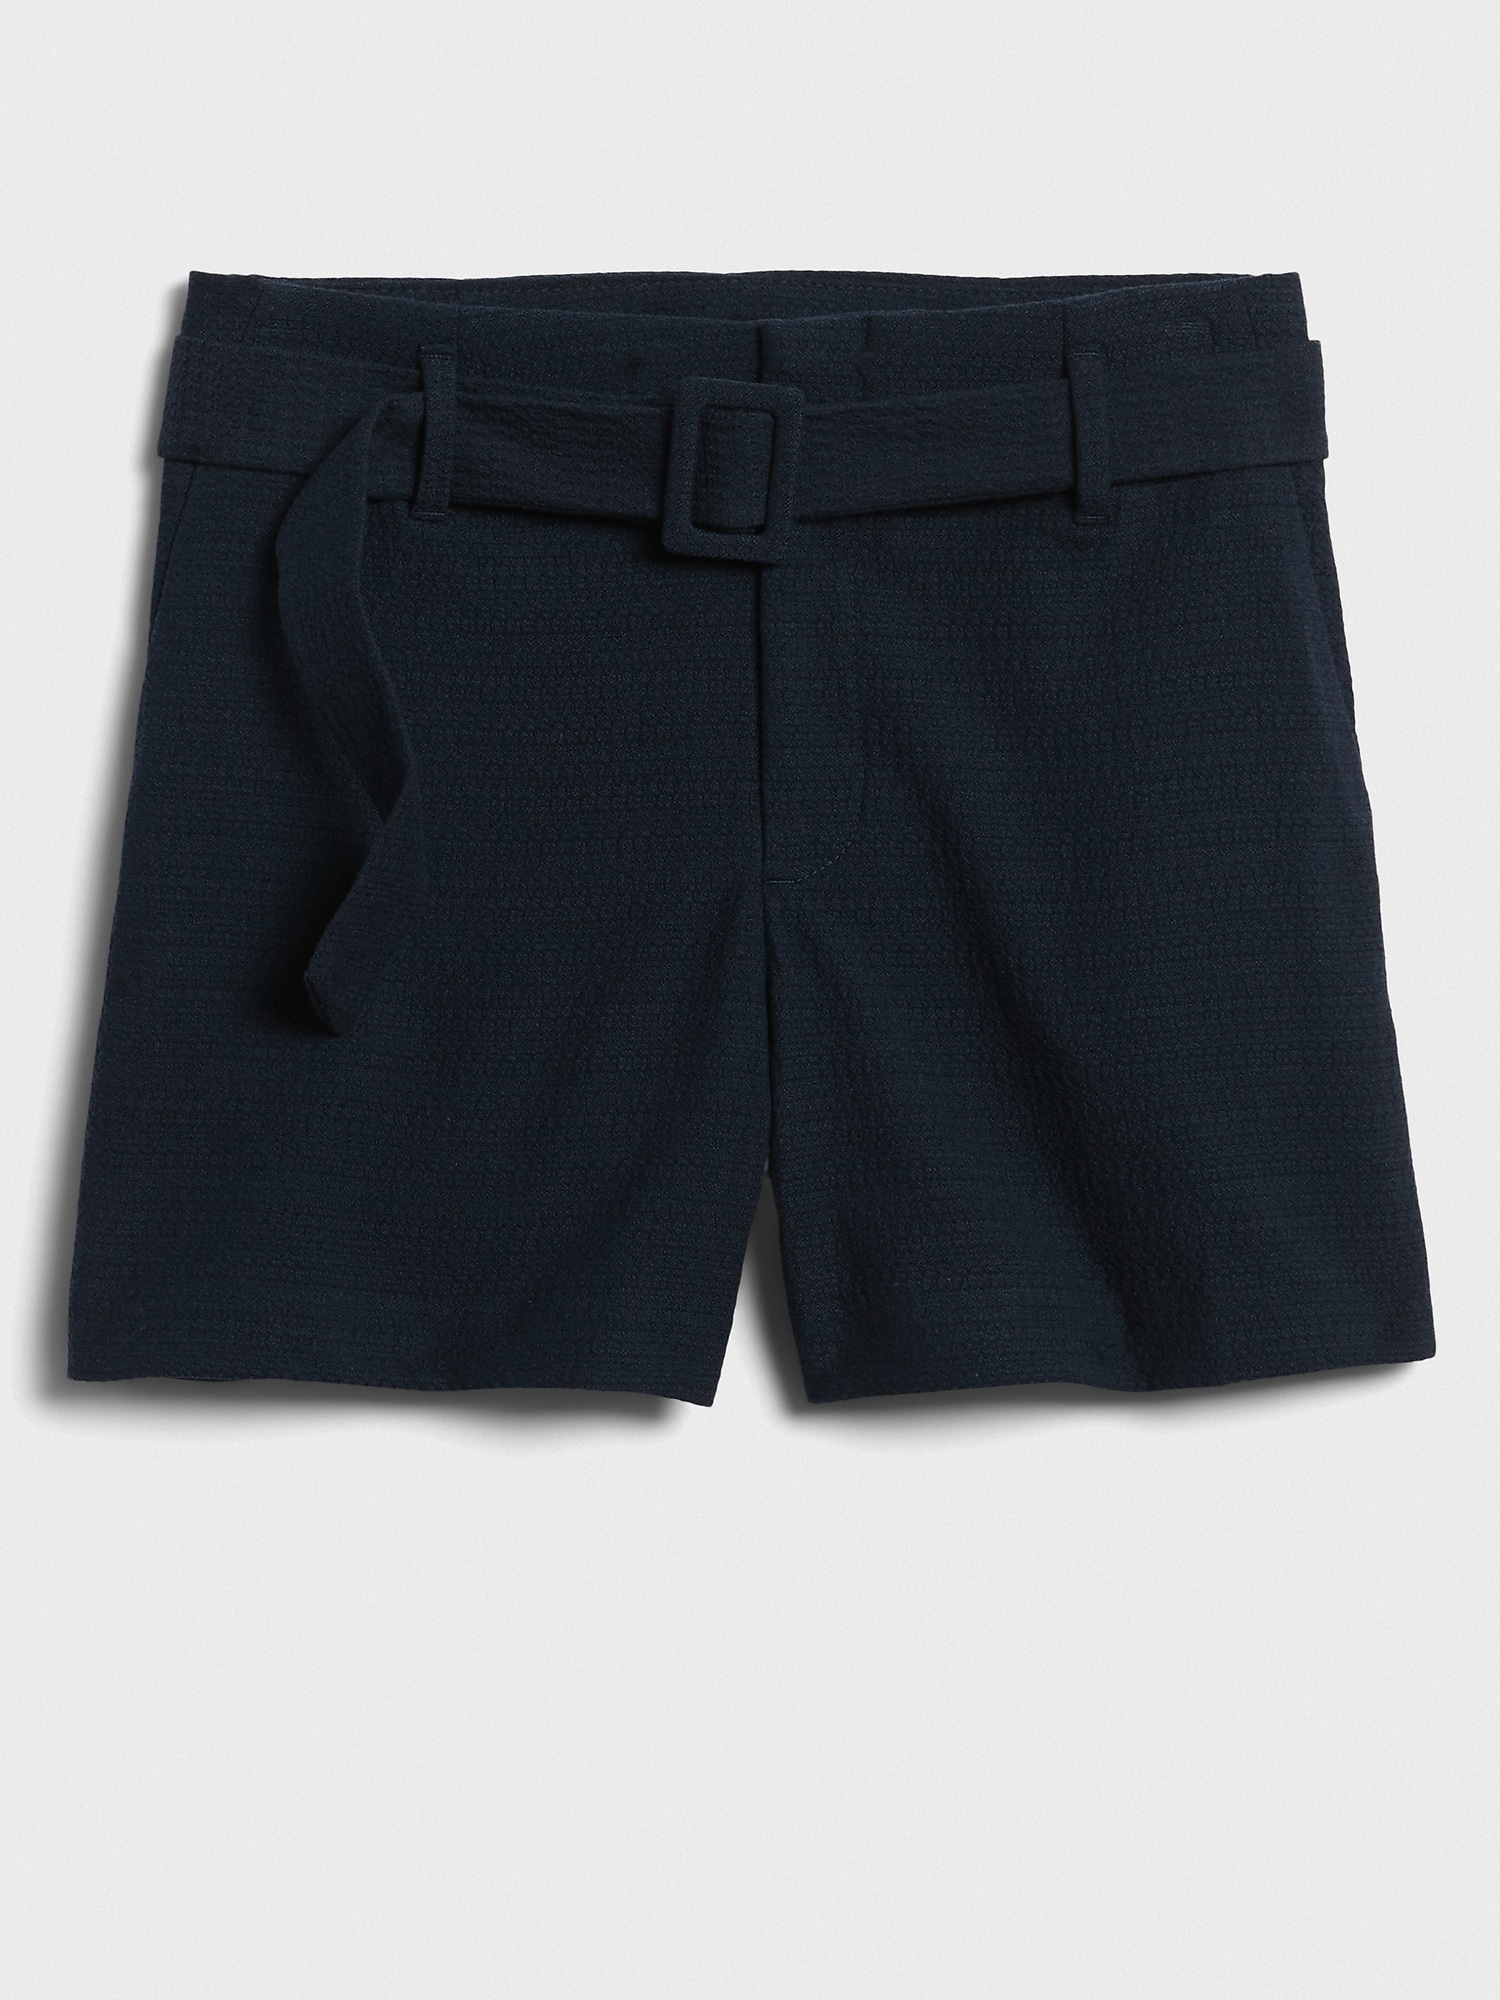 High-Rise Belted Short - 4 inch inseam